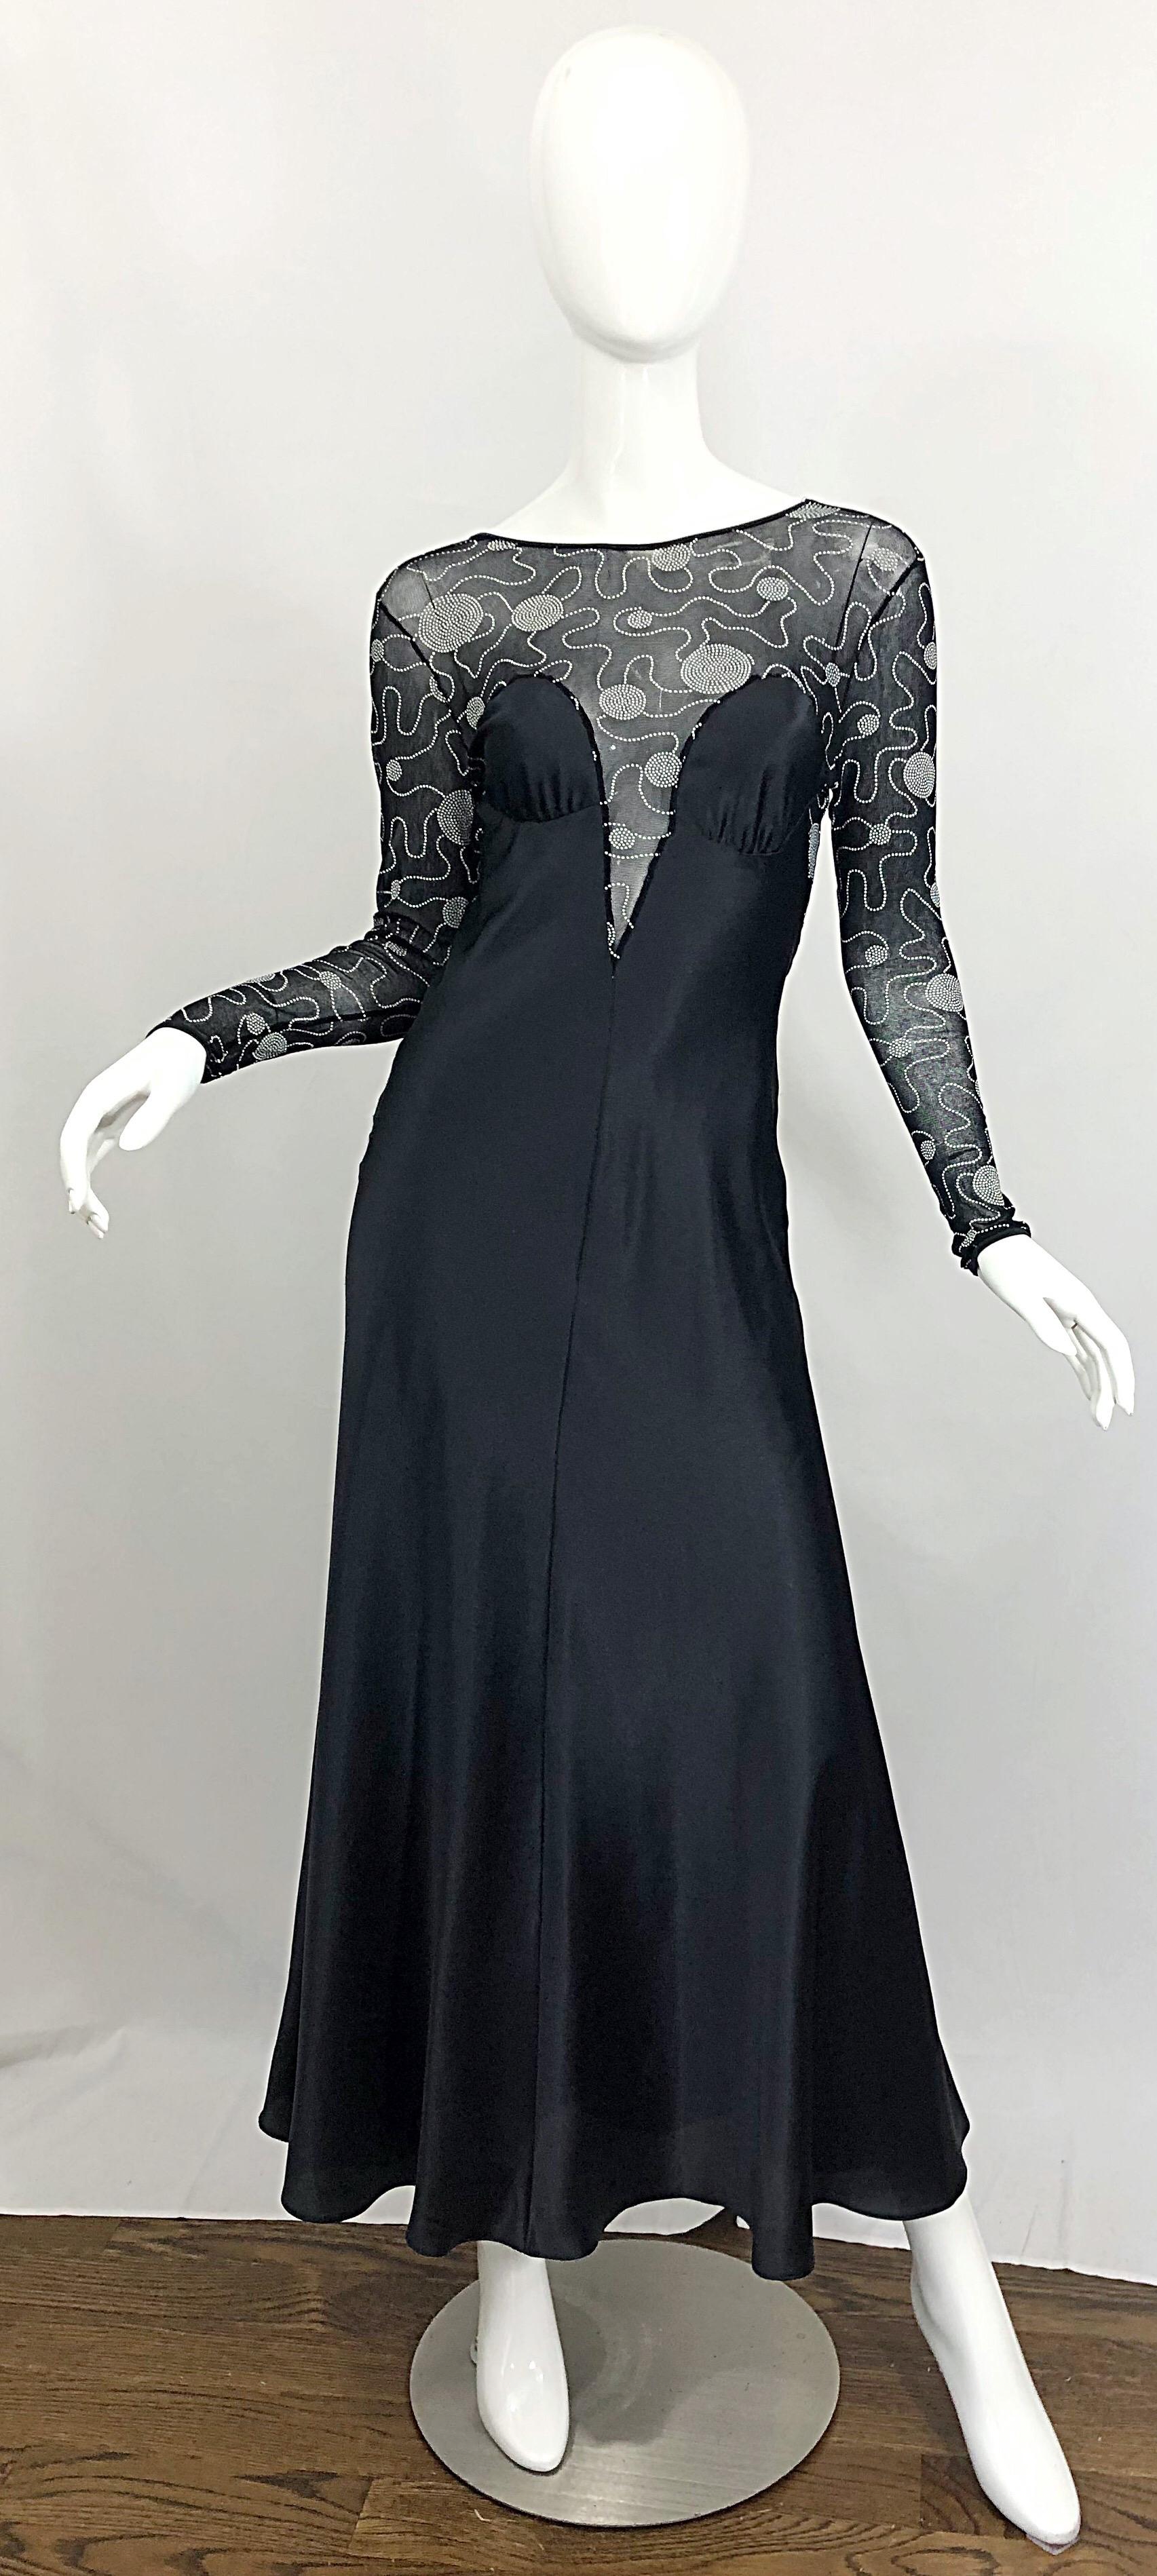 Sexy vintage 1980s BOB MACKIE for SAKS 5th AVENUE black and white plunging low back evening nightgown! Features a sheer black and white mesh bodice, back and sleeves. Simply slips over the head and stretches to fit. Slinky and flattering, this is a